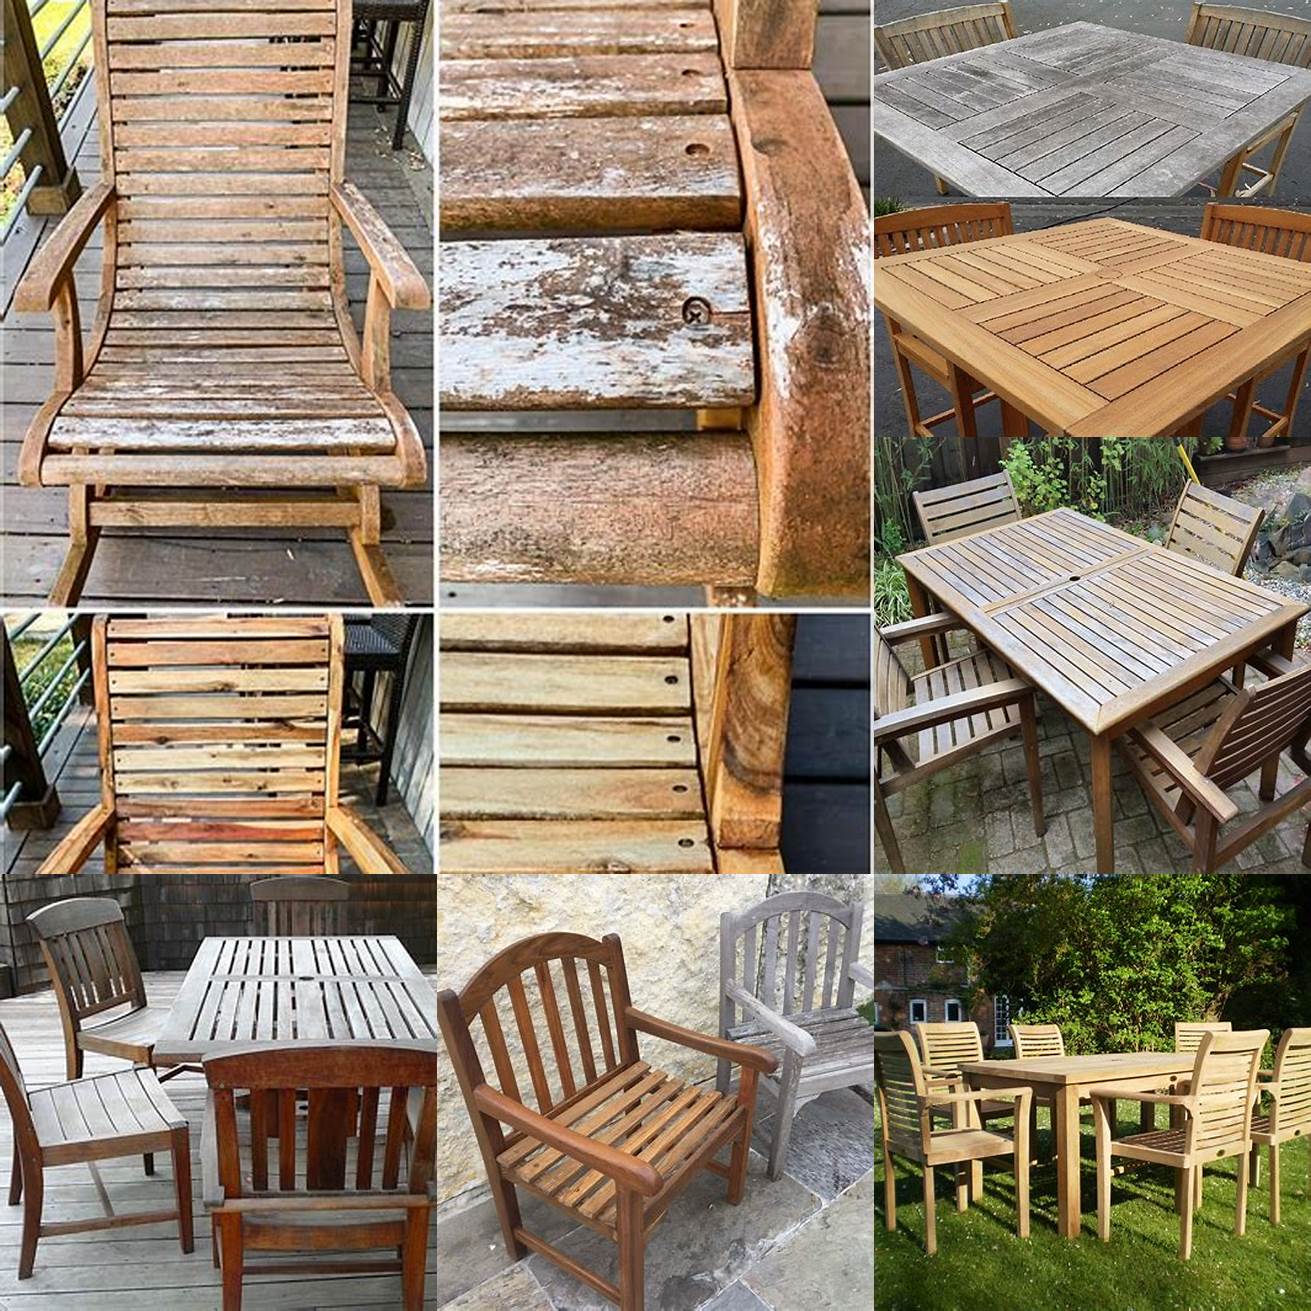 Teak Garden Furniture Before and After